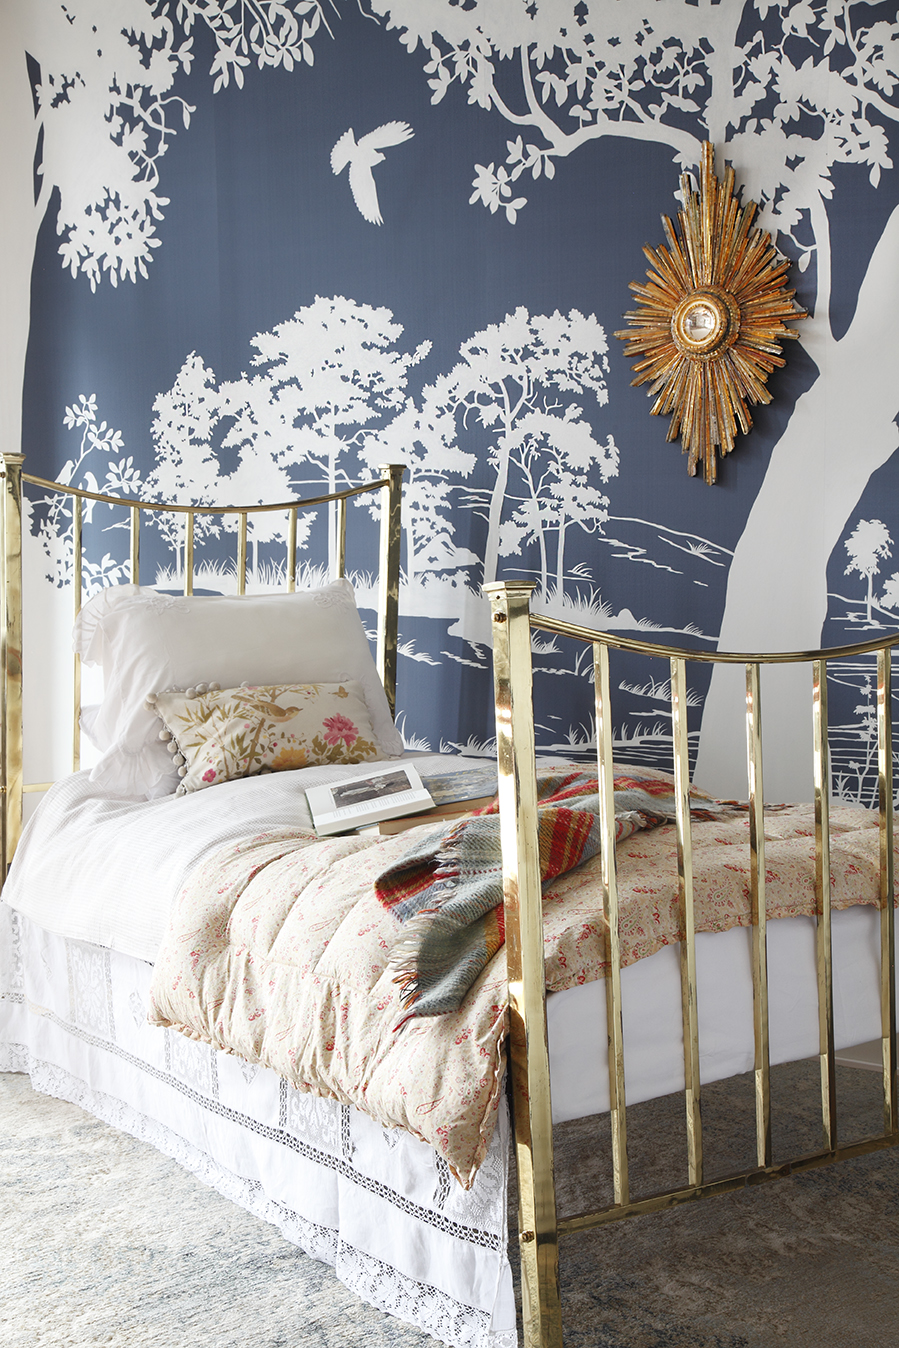 Romantic brass bed against a blue and white pictorial wallpaper